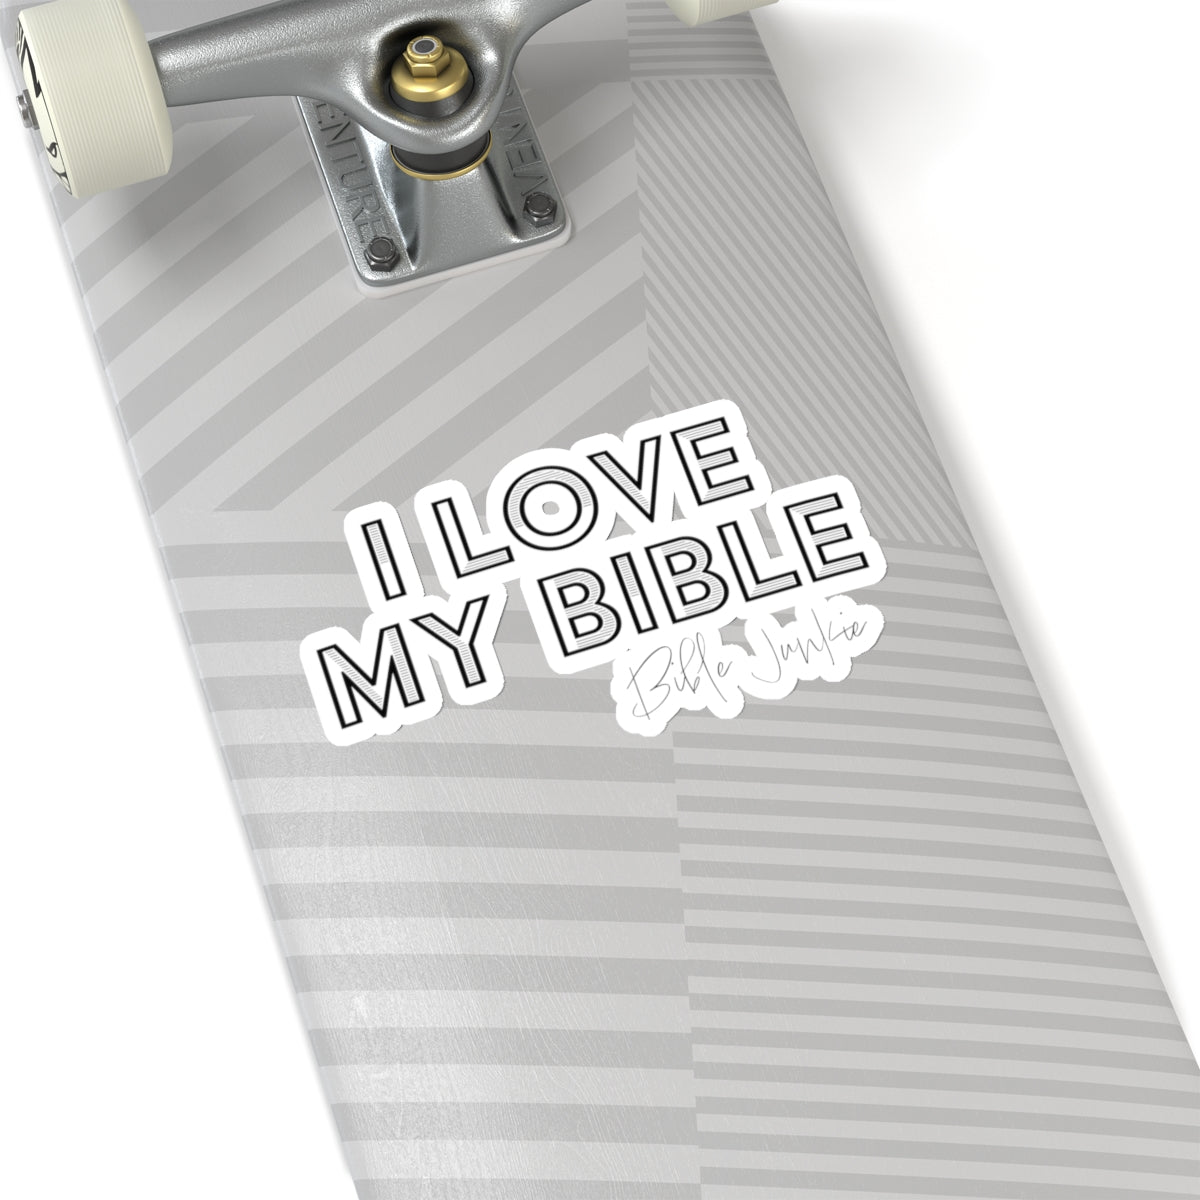 LOVE MY BIBLE. Gods Word. Wear It. Share It. Live your Faith Out Loud. Stickers for. Cars. Trucks. Computers. Gifts. Christian. Faith. Hope. Believe.